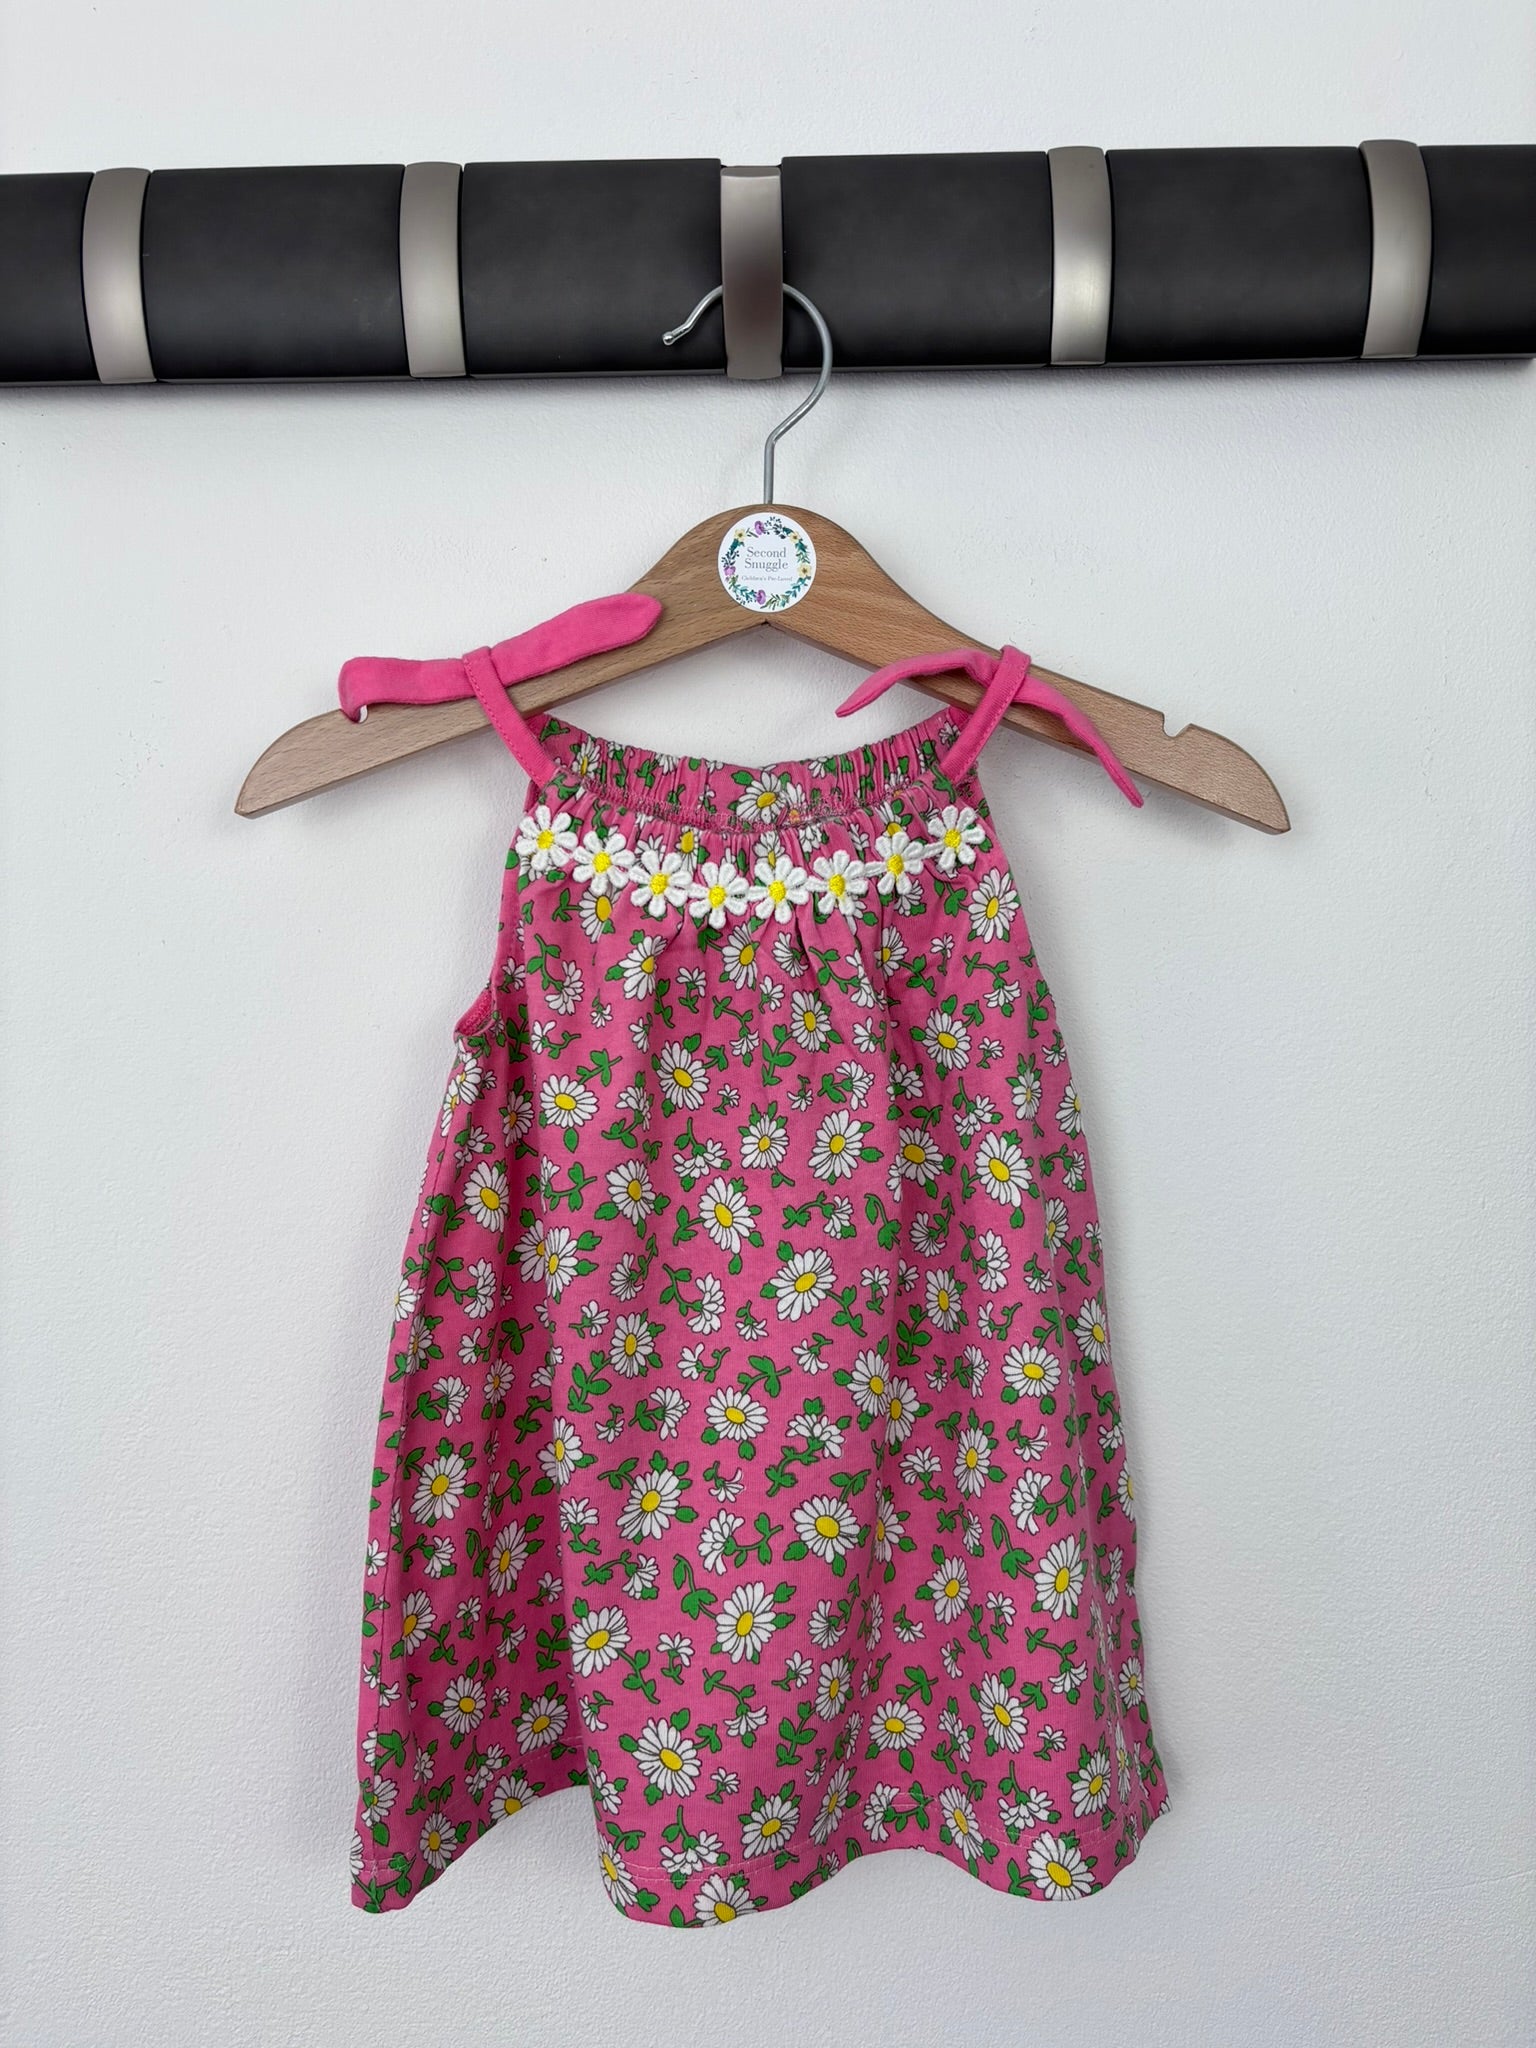 Baby Boden 6-12 Months-Dresses-Second Snuggle Preloved